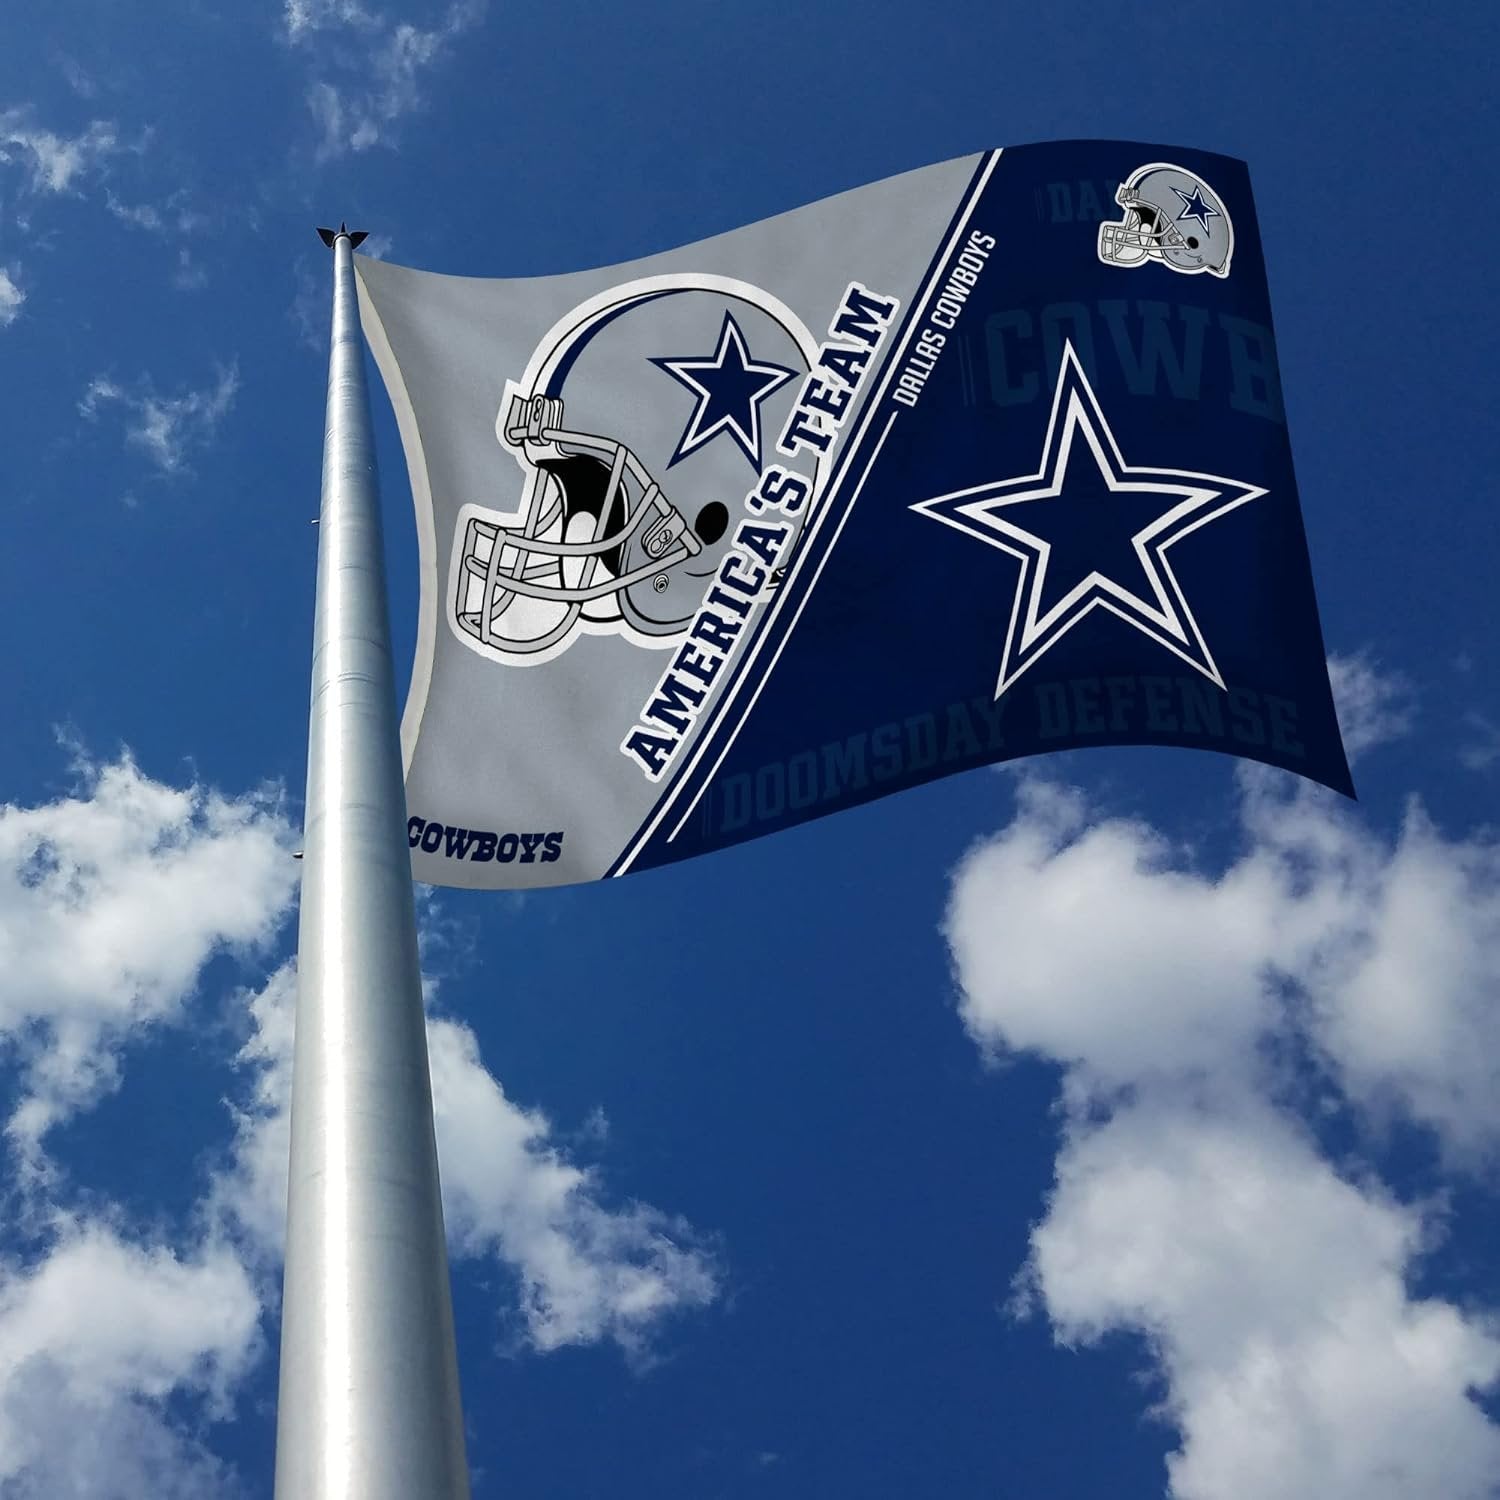 Dallas Cowboys 3x5 Feet Flag Banner, Split Design, Metal Grommets, Single Sided, Indoor or Outdoor Use